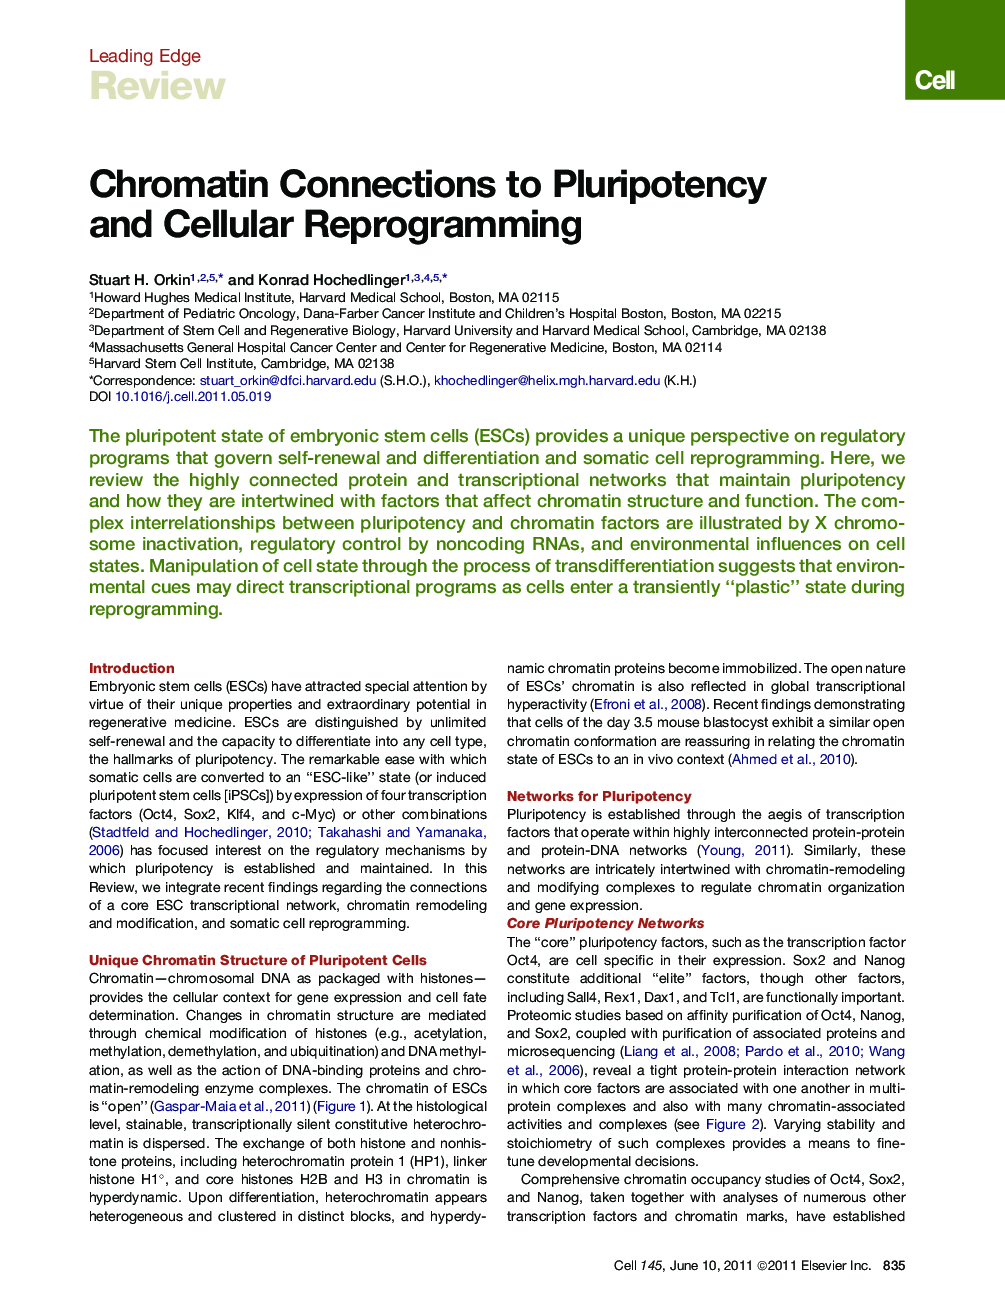 Chromatin Connections to Pluripotency and Cellular Reprogramming